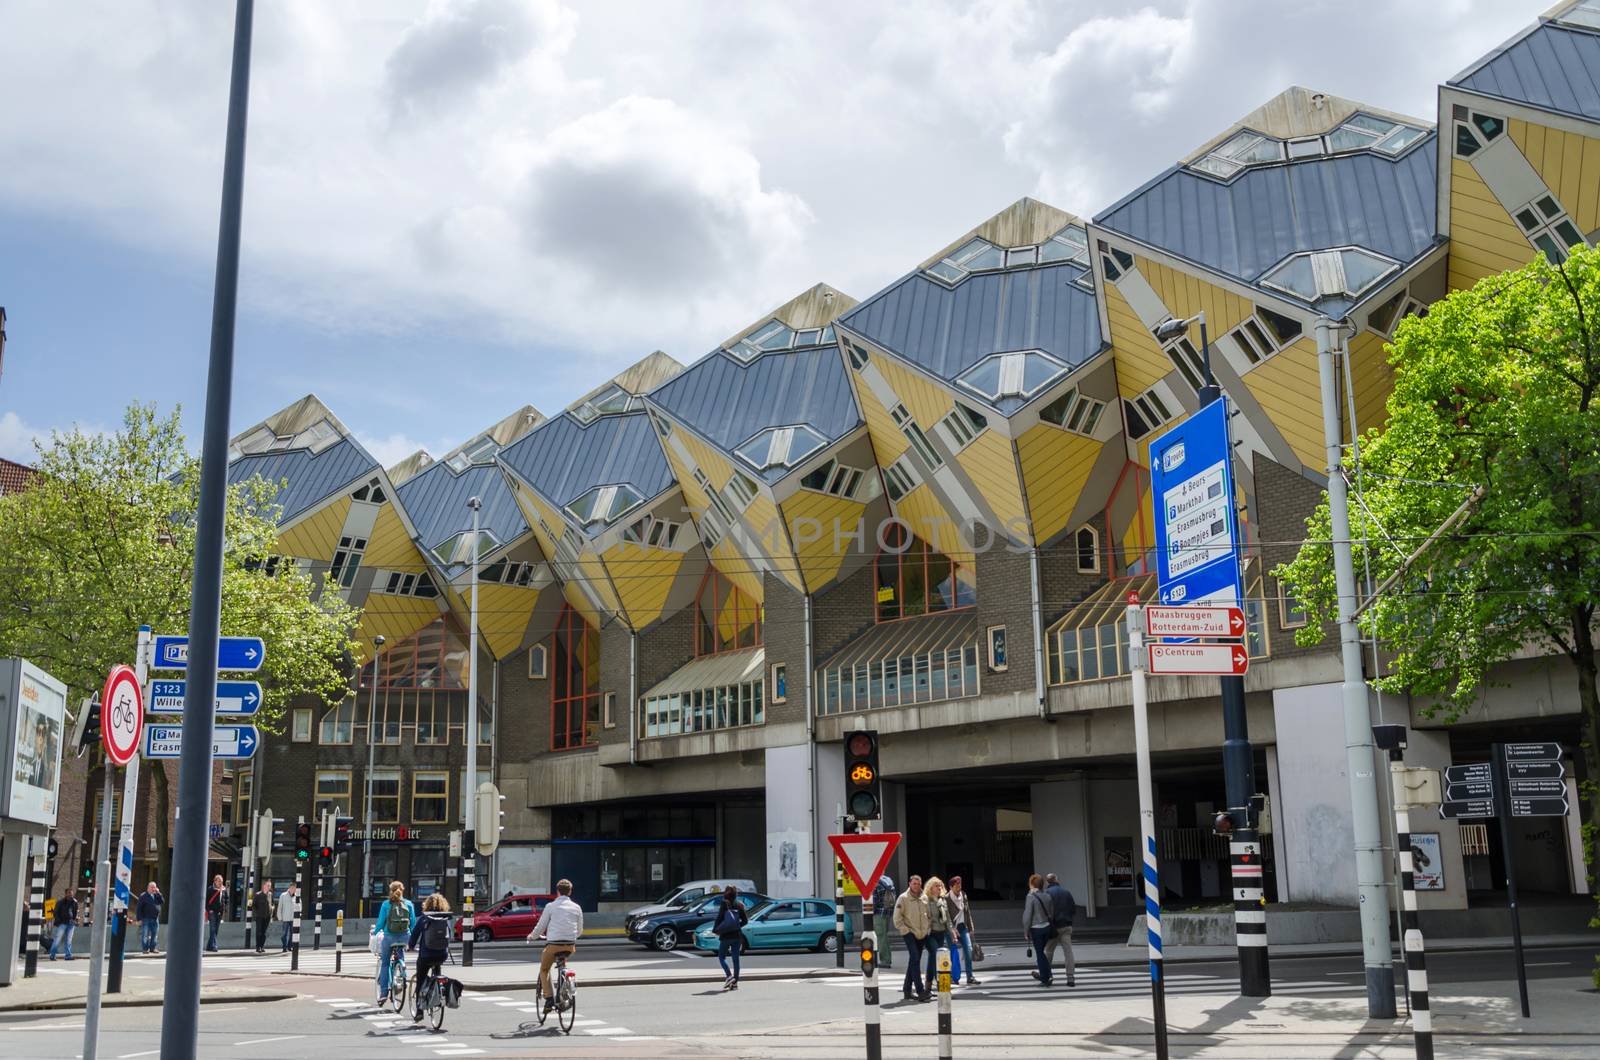 Rotterdam, Netherlands - May 9, 2015: Tourist visit Cube Houses in Rotterdam by siraanamwong